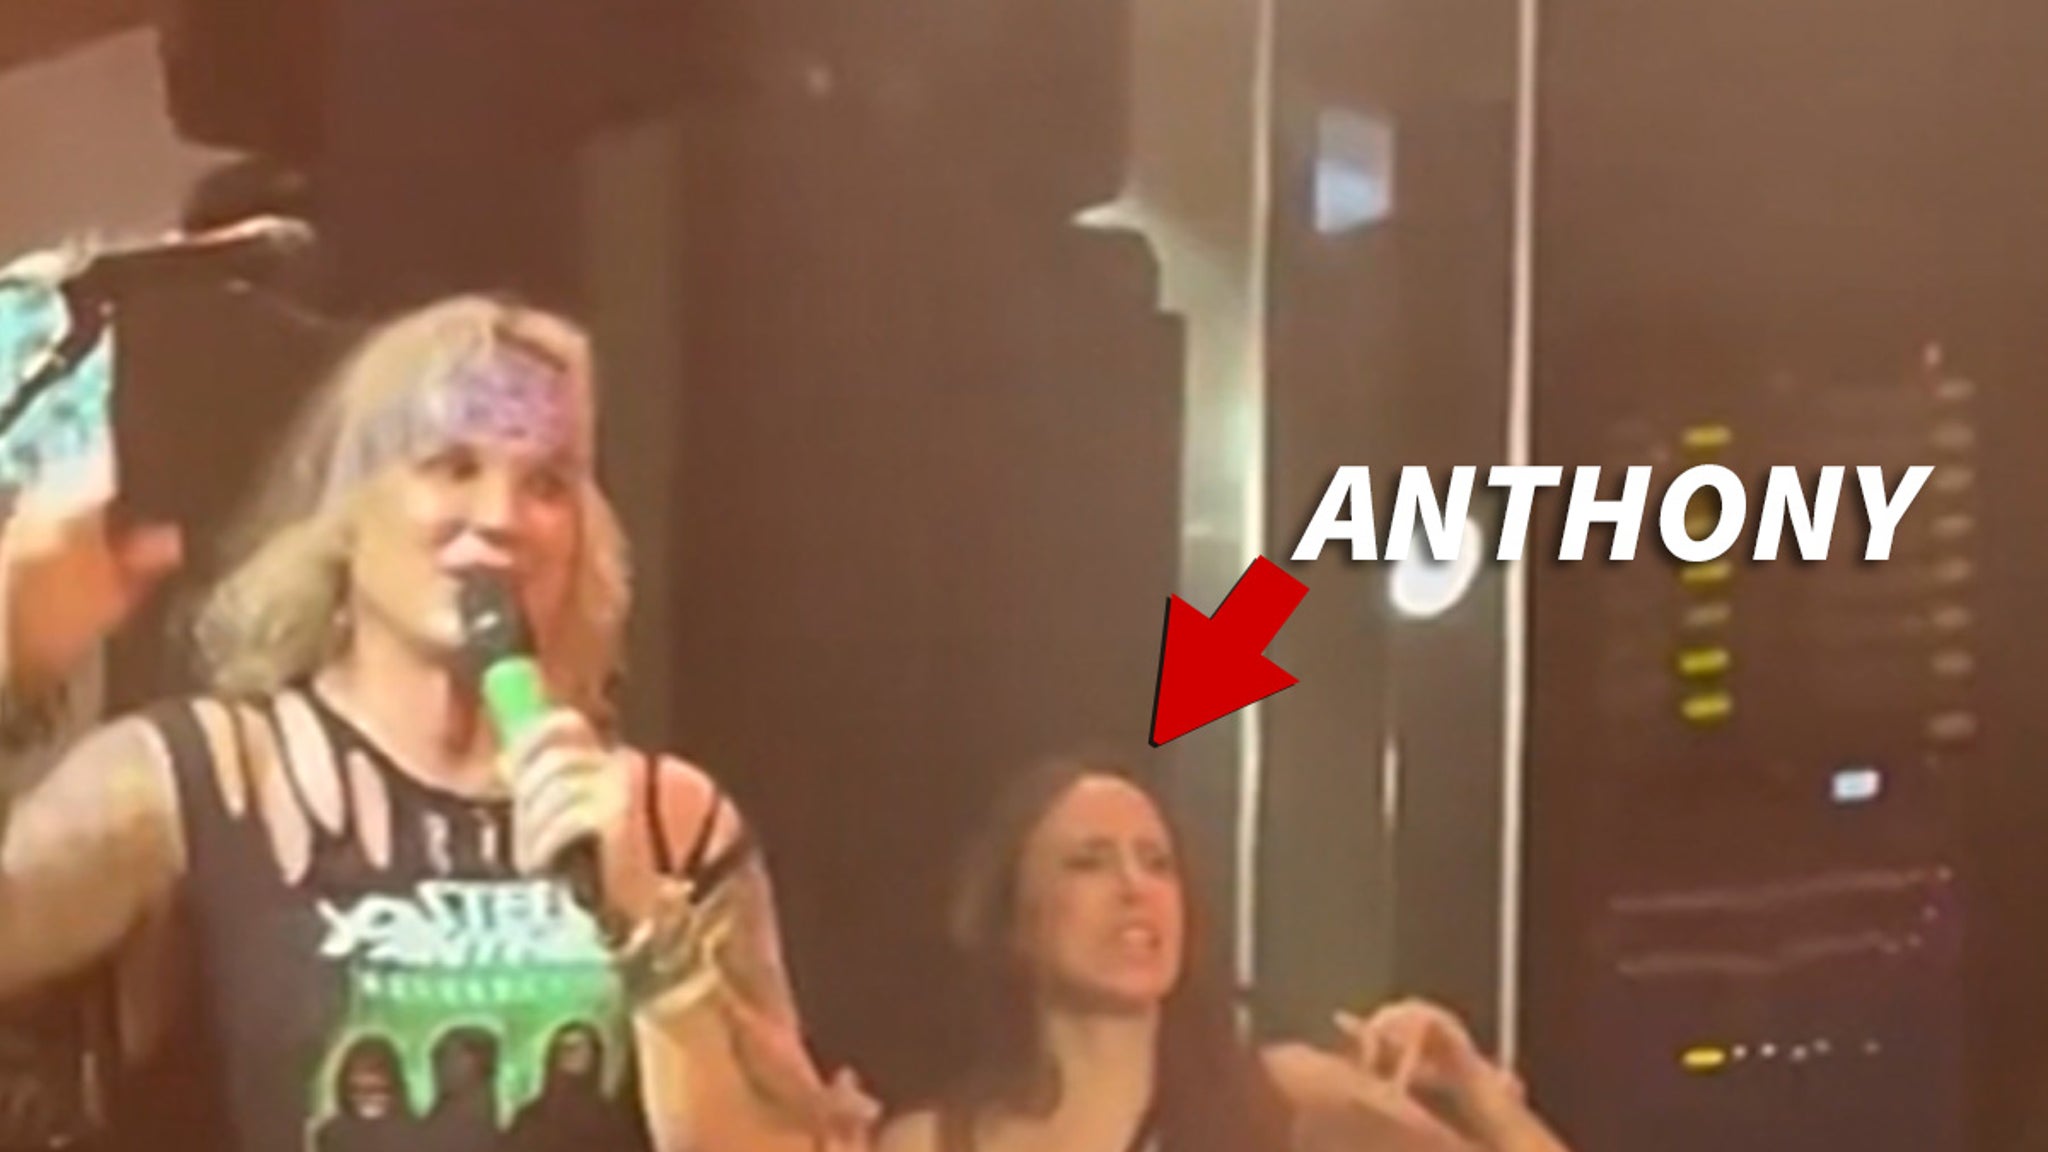 Casey Anthony Rocking Out with Steel Panther Amid New Controversial Doc